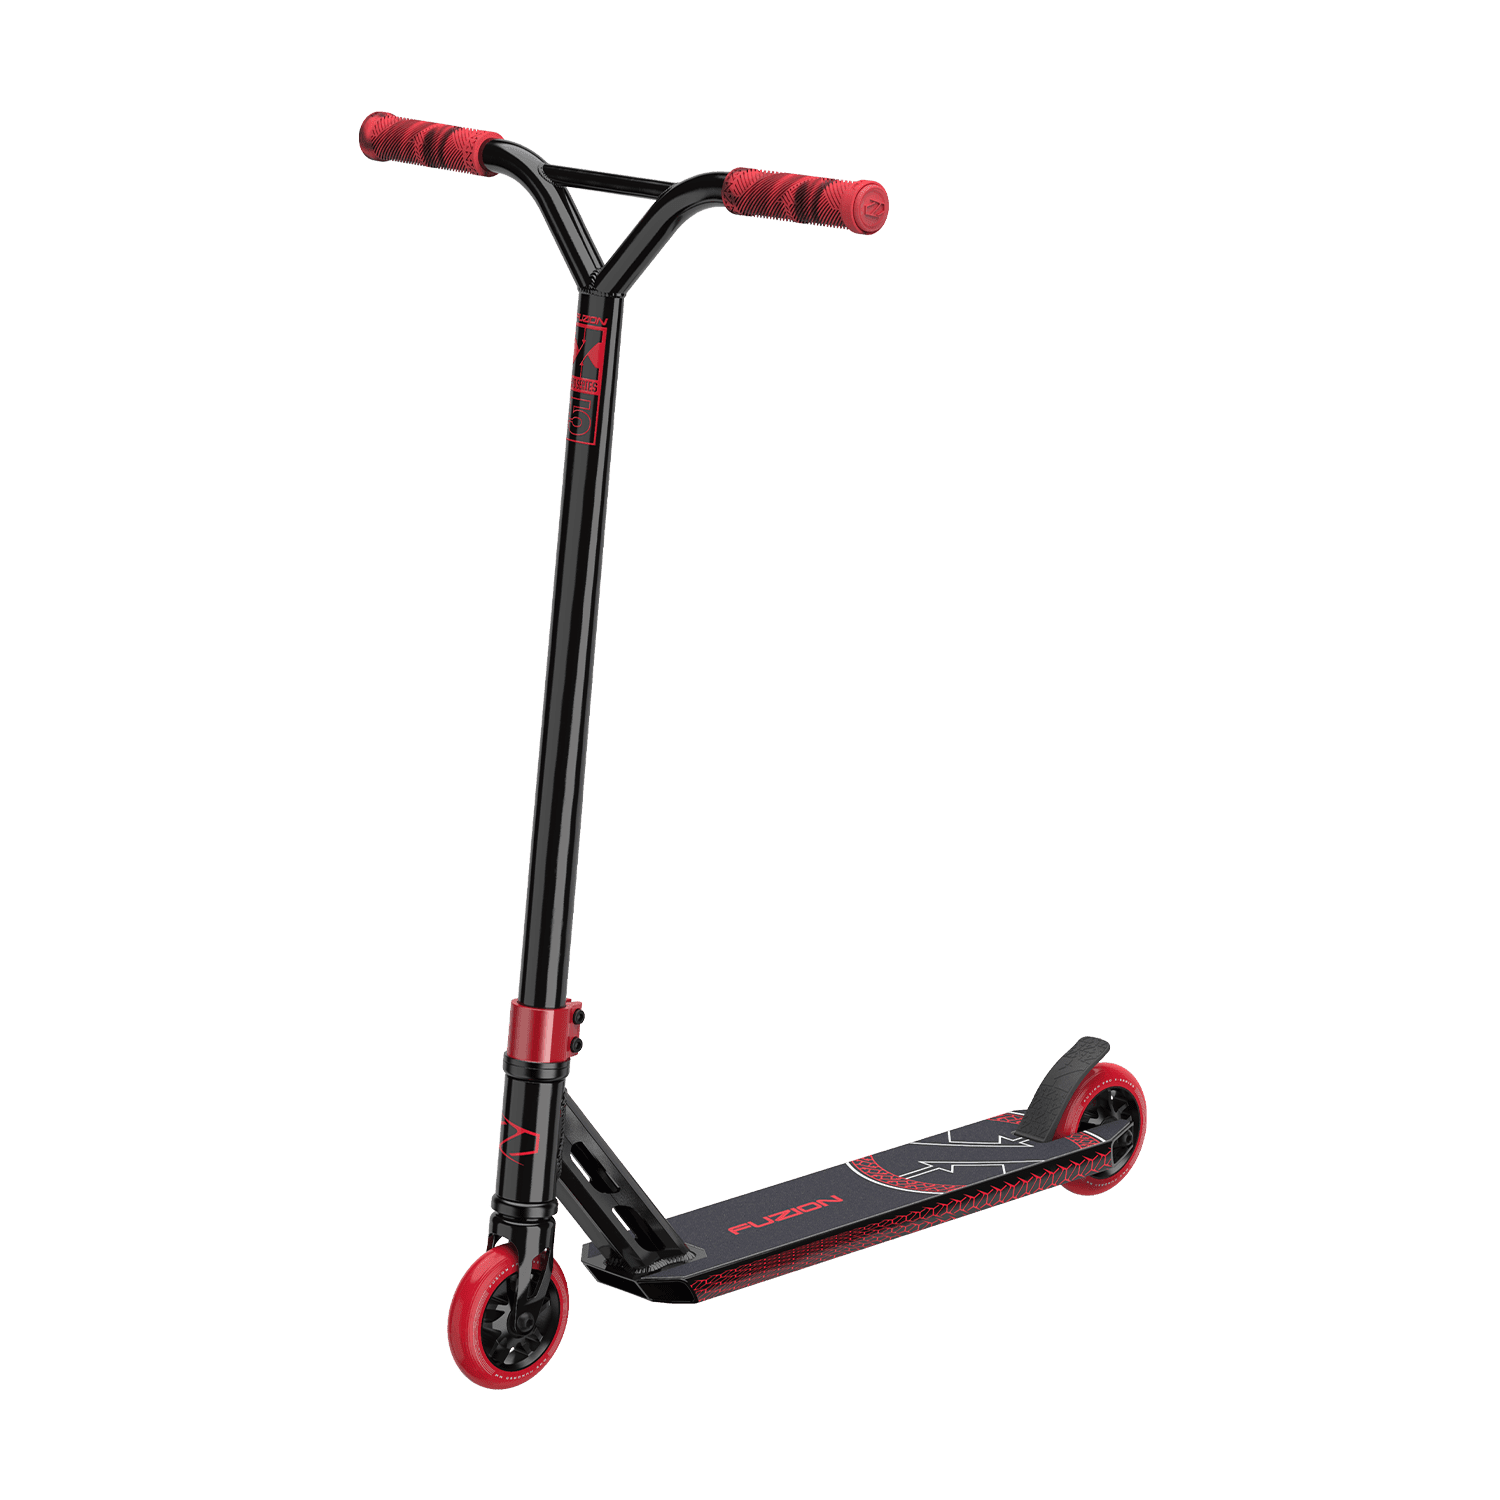 Fuzion X-5 Pro Scooter - Trick Scooter for Kids 8 Years and Up - Pro Scooters for Teens - Best Stunt Scooter for BMX Tricks - Walmart.com